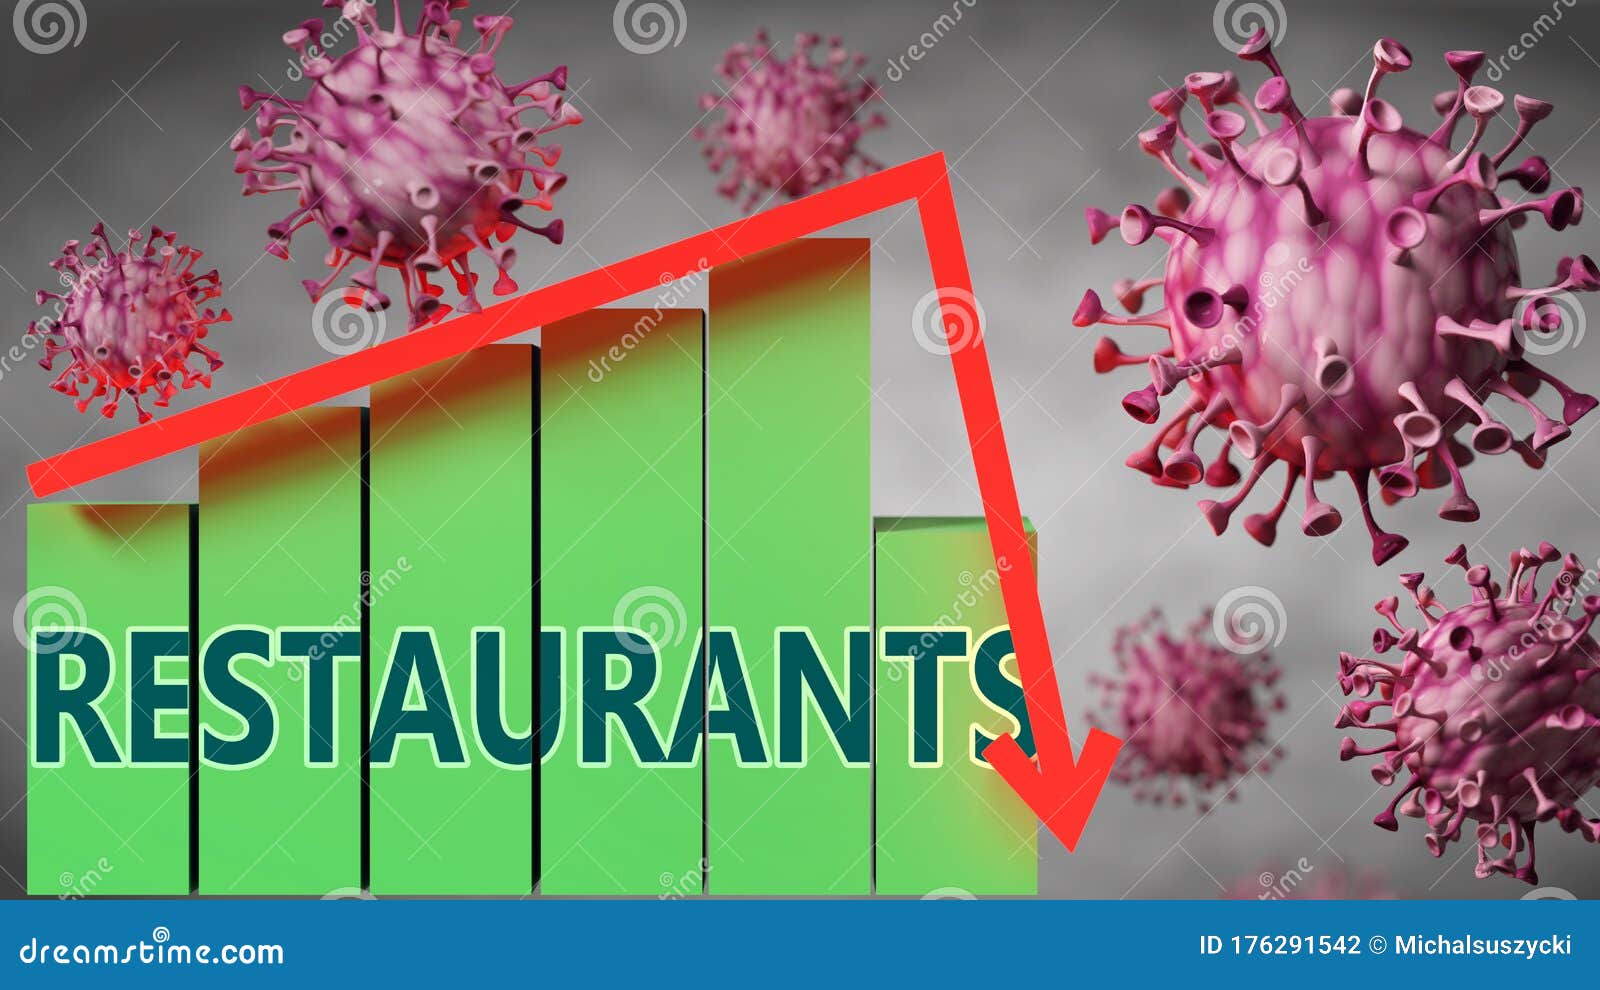 restaurants and covid-19 virus, ized by viruses and a price chart falling down with word restaurants to picture relation